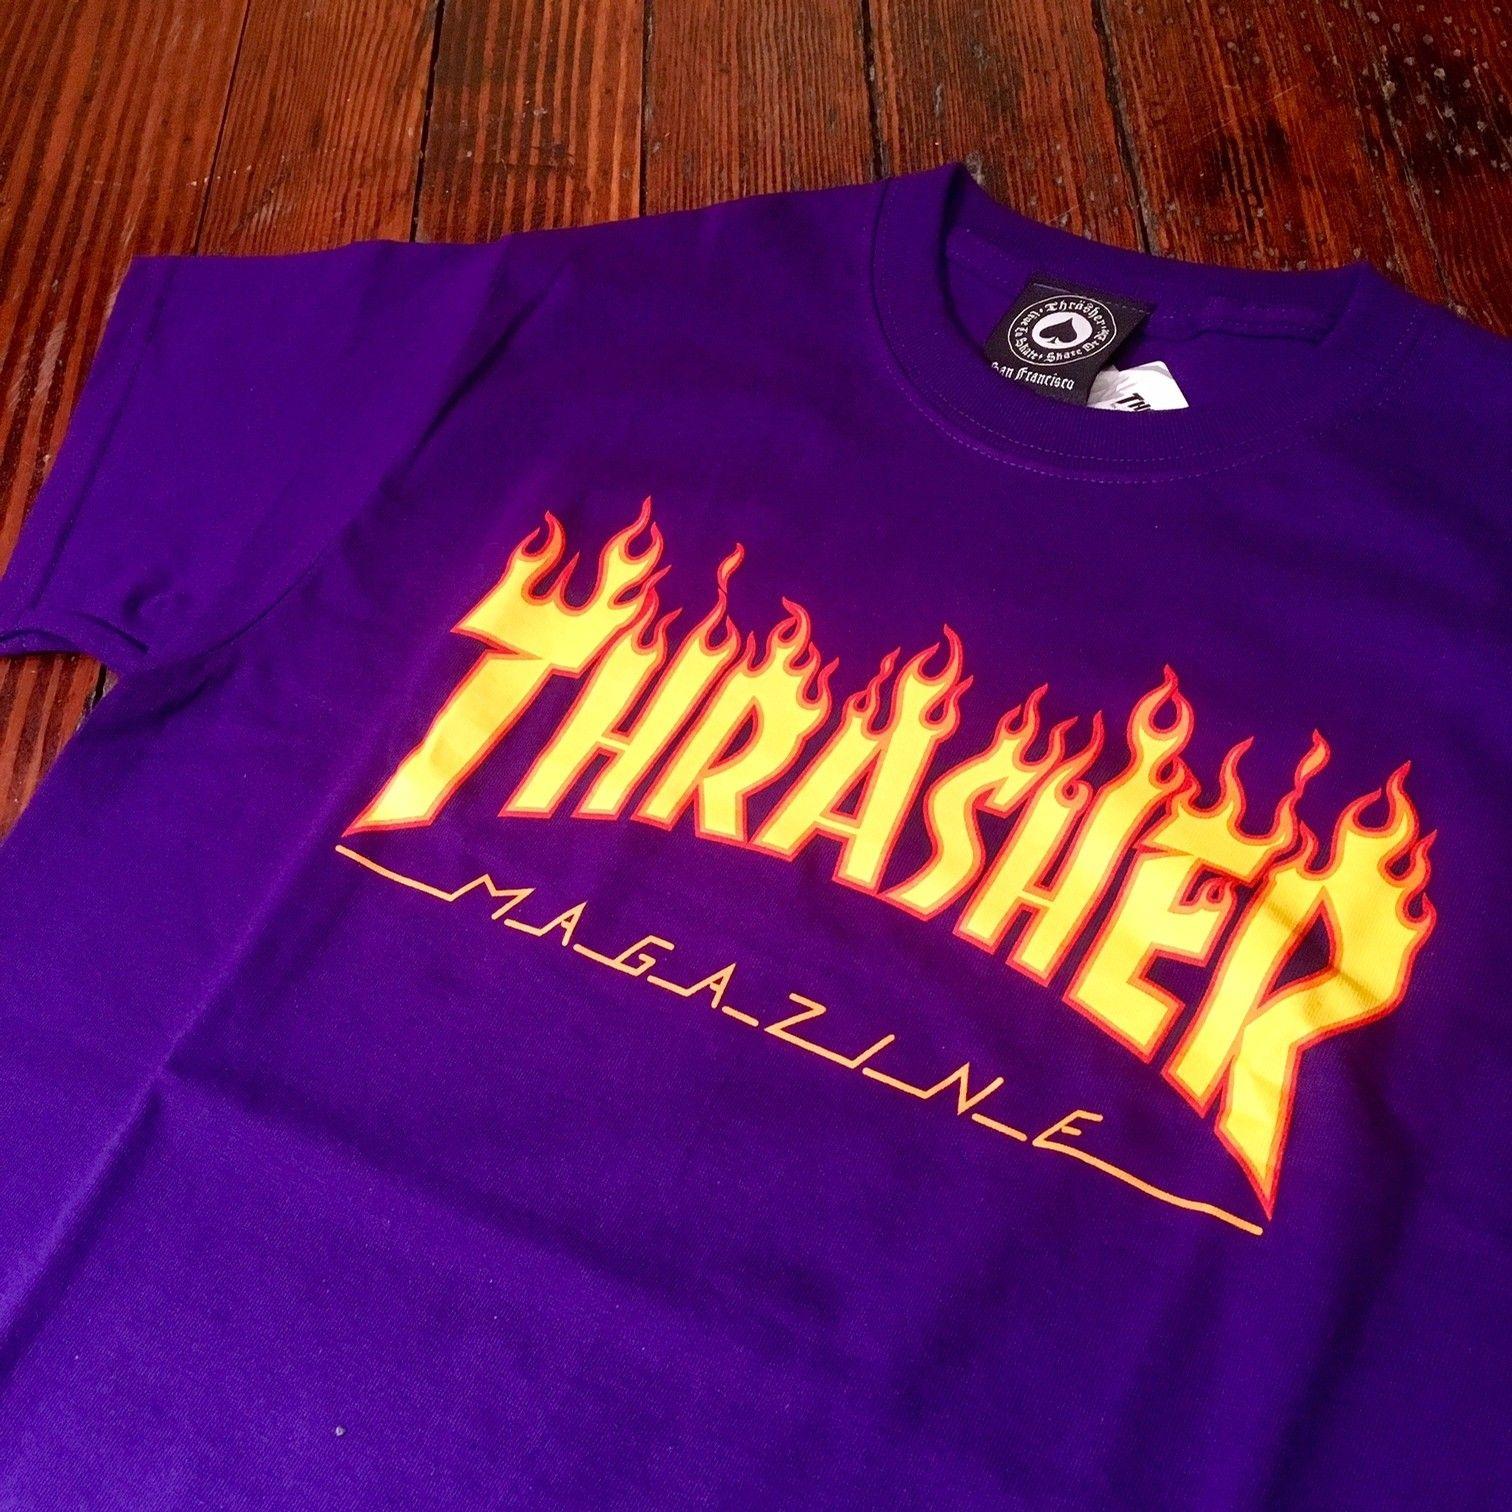 Blue G with Flame Logo - THRASHER FLAME LOGO (PURPLE) APPAREL TOPS T-SHIRTS at Blacklist